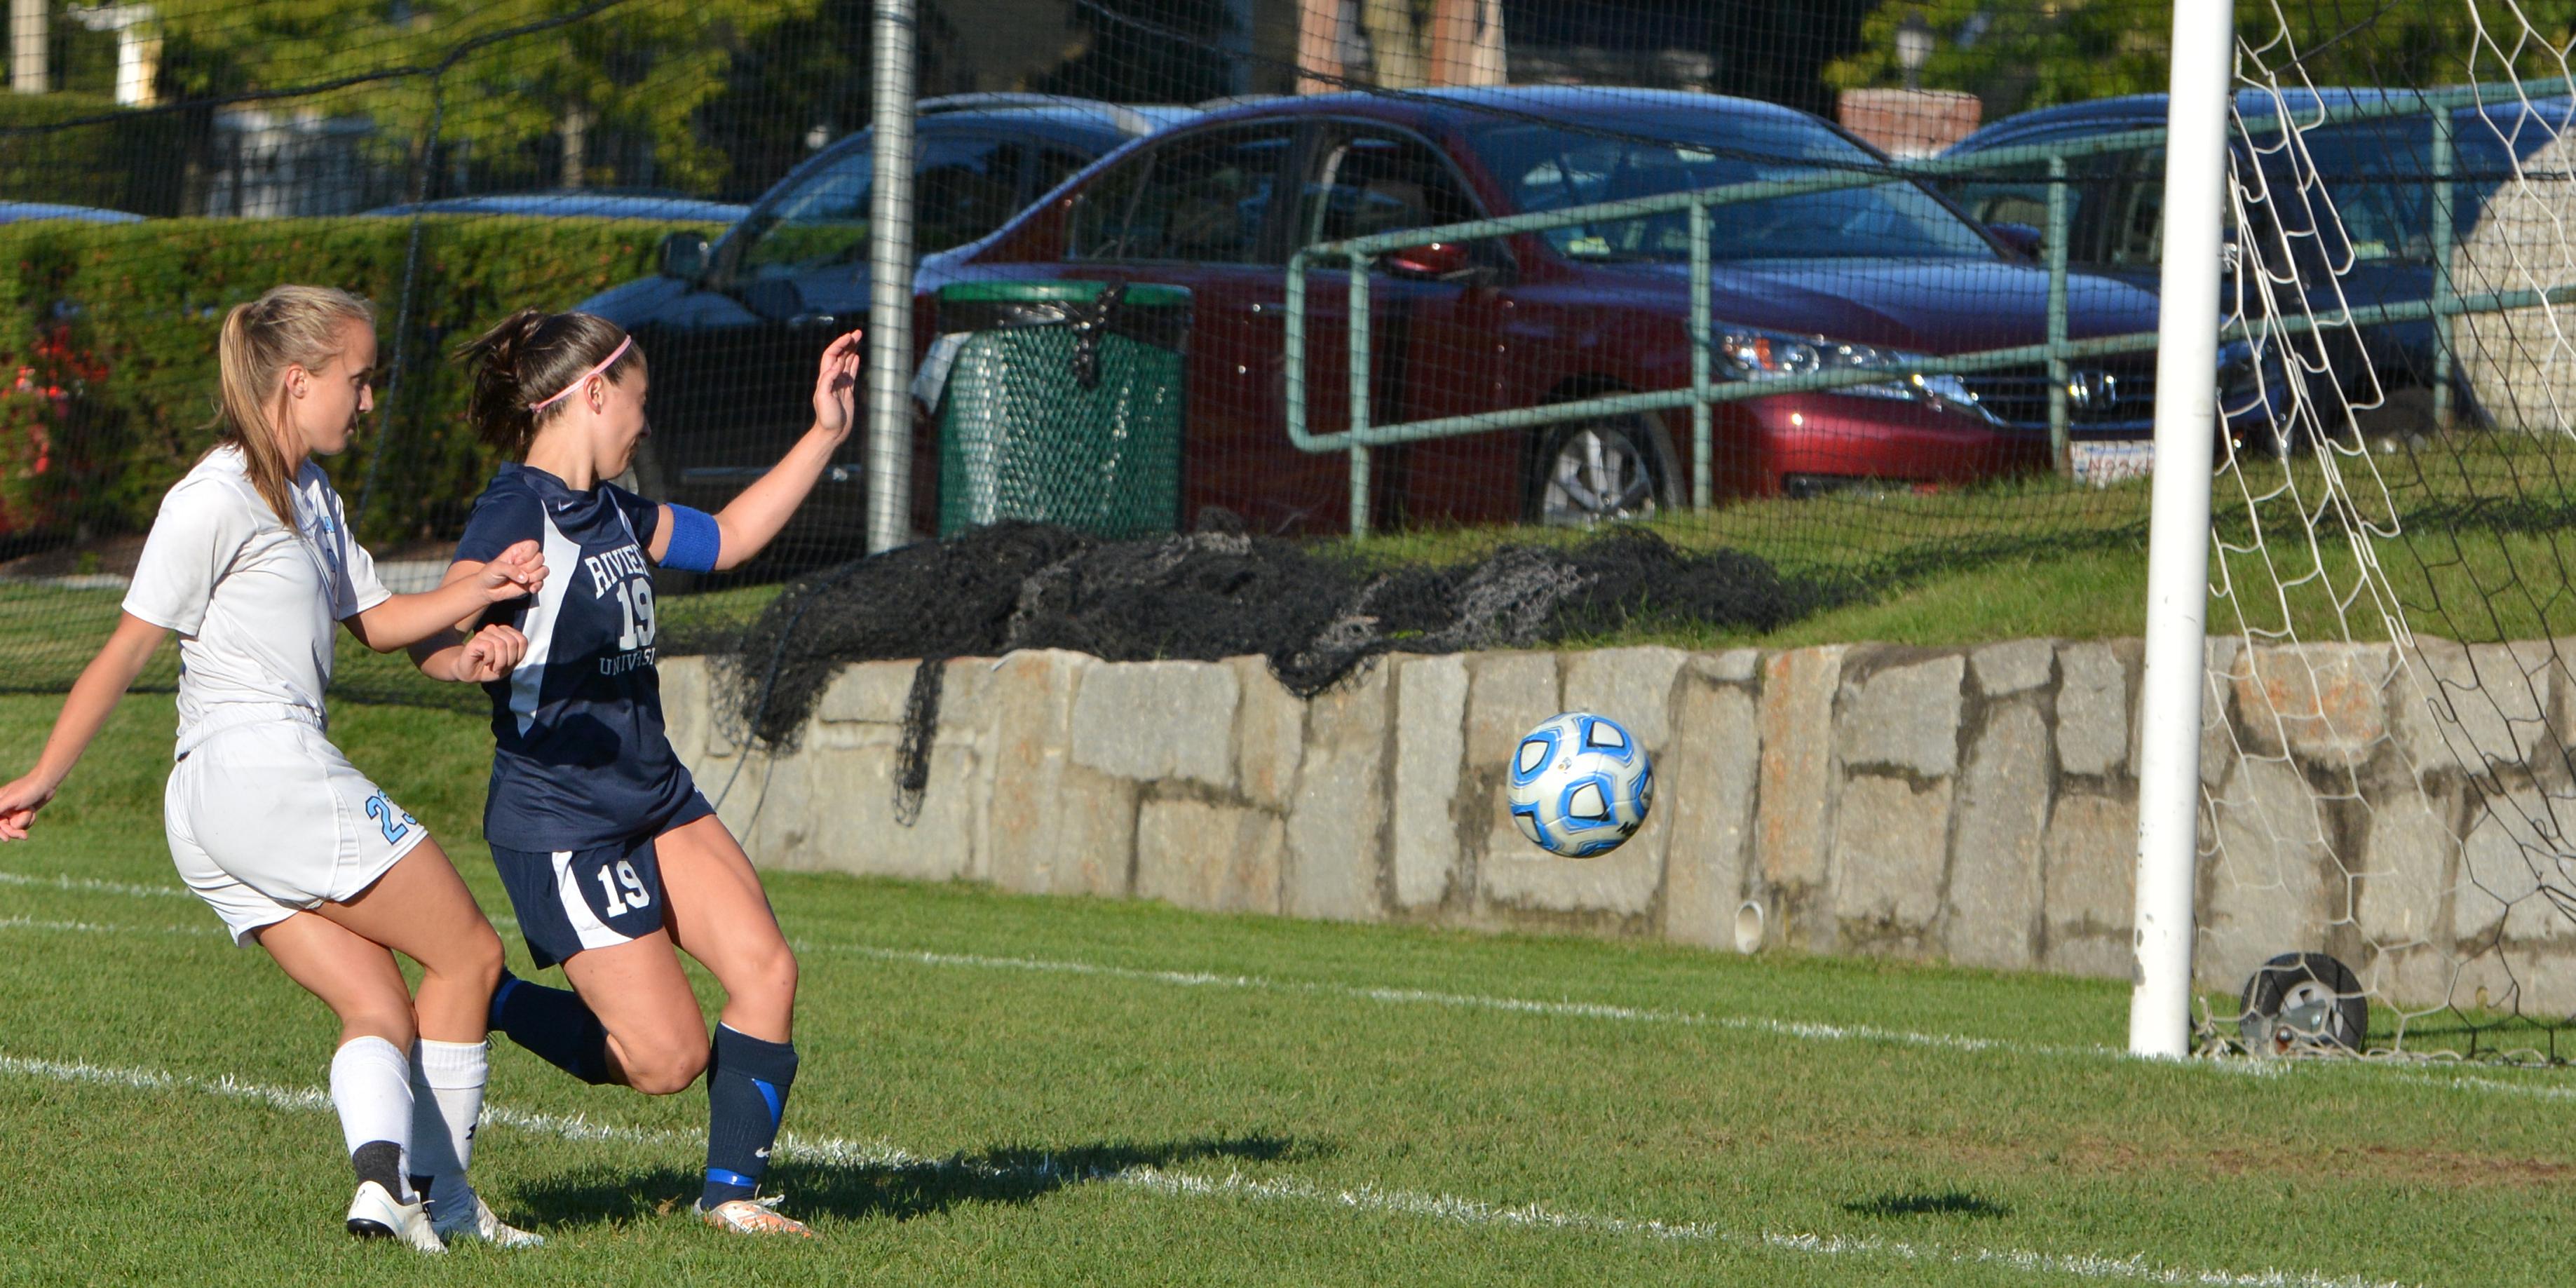 Amherst Tips Lasell, 1-0 in Women's Soccer